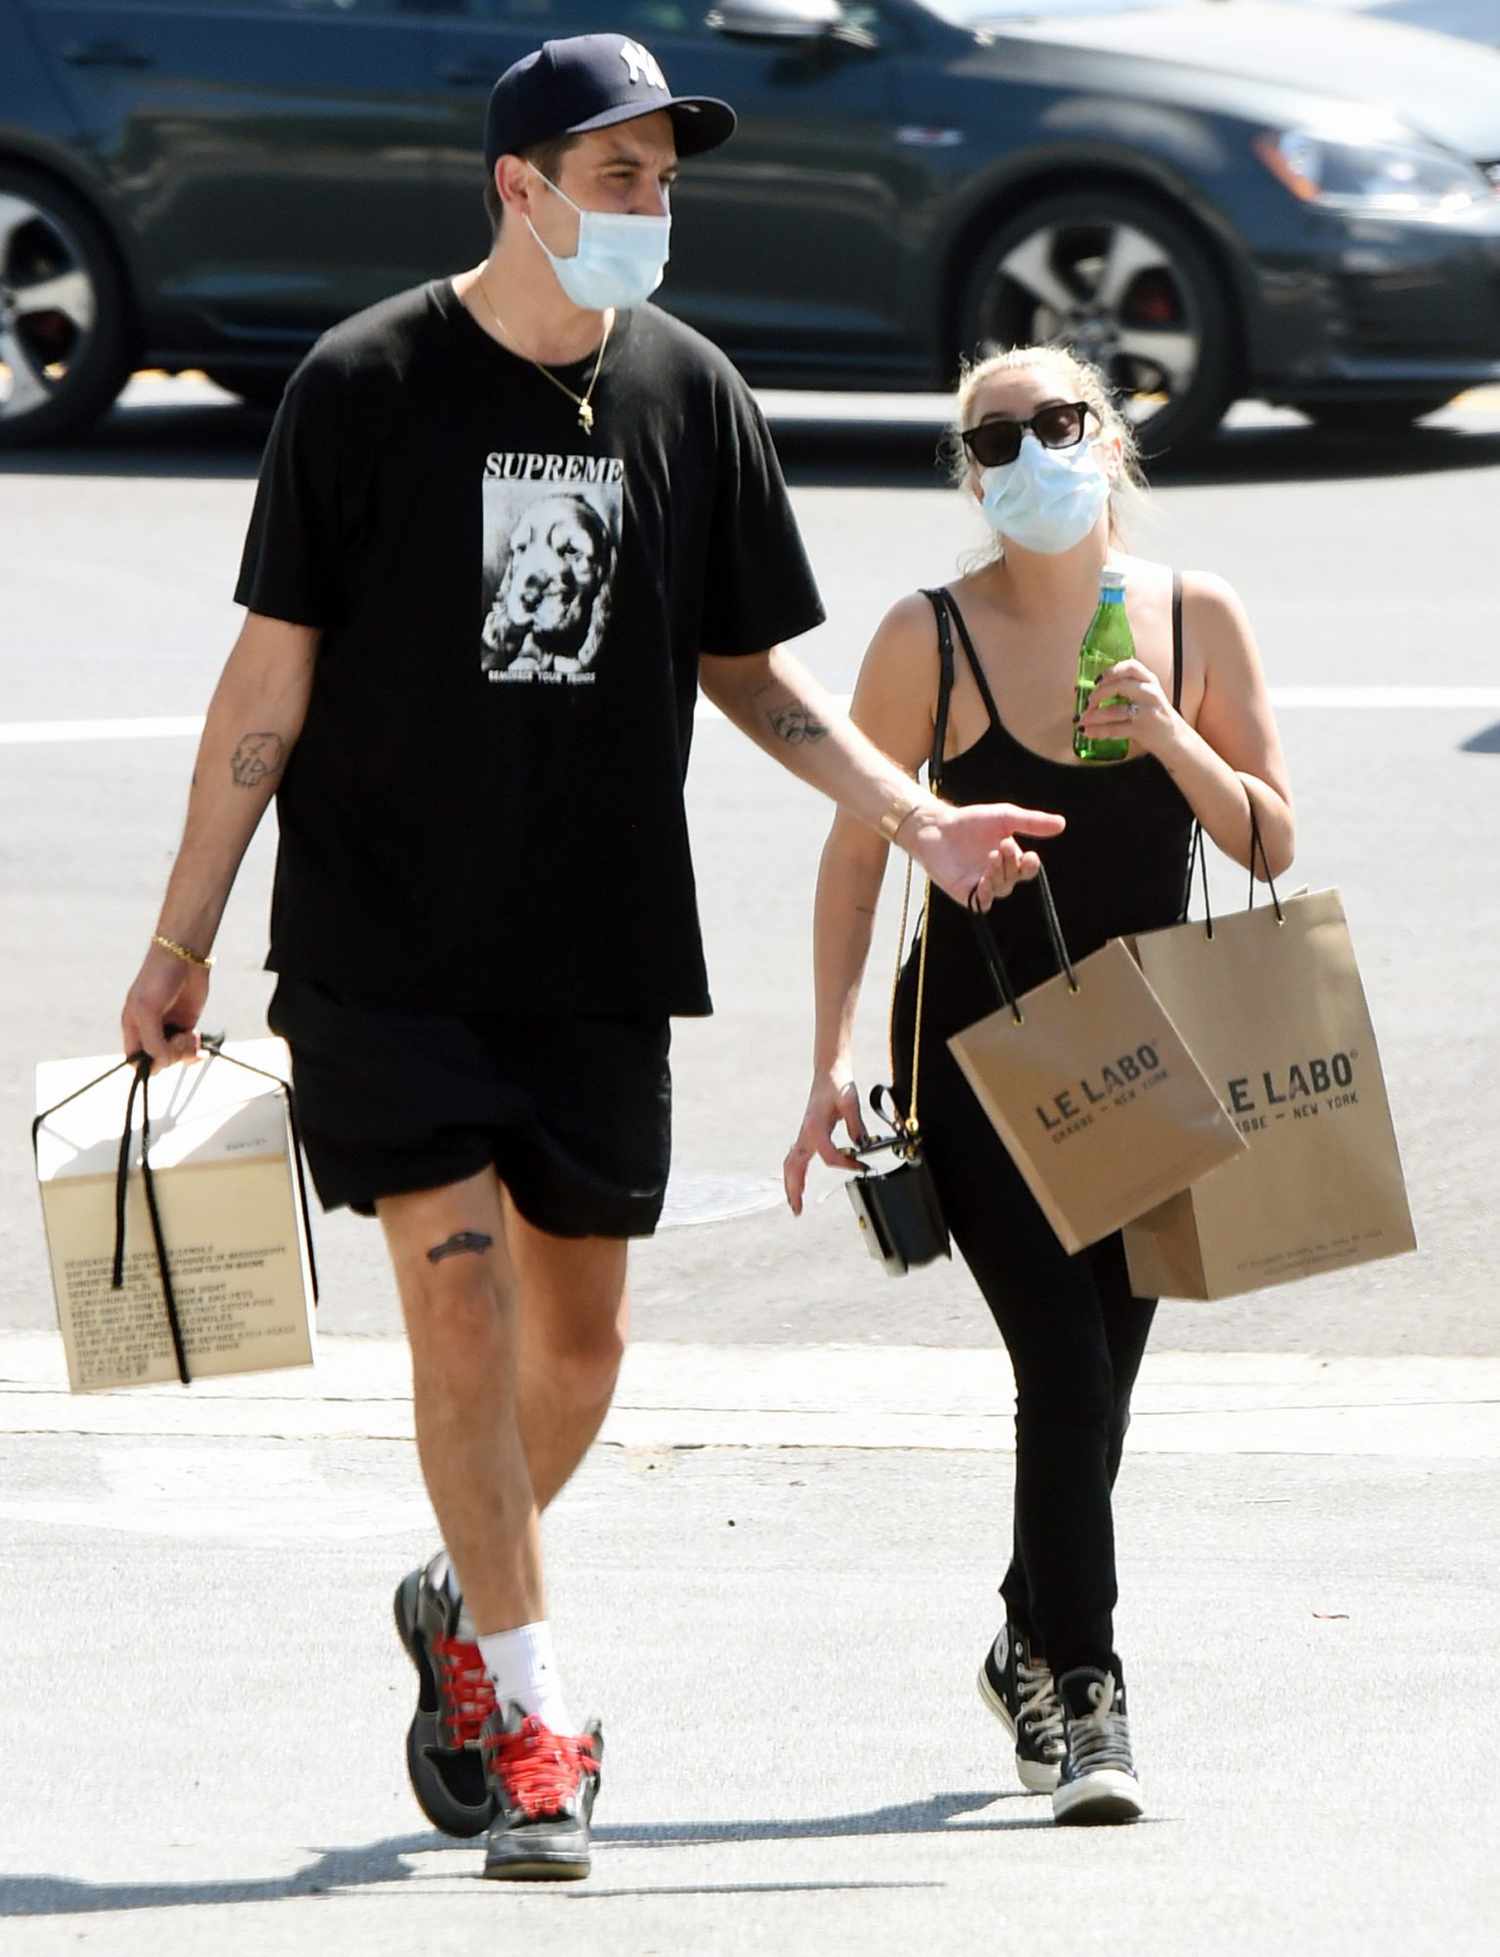 Ashley Benson and G-Eazy Do Some Shopping at the Le Labo Perfume Store in Los Angeles.